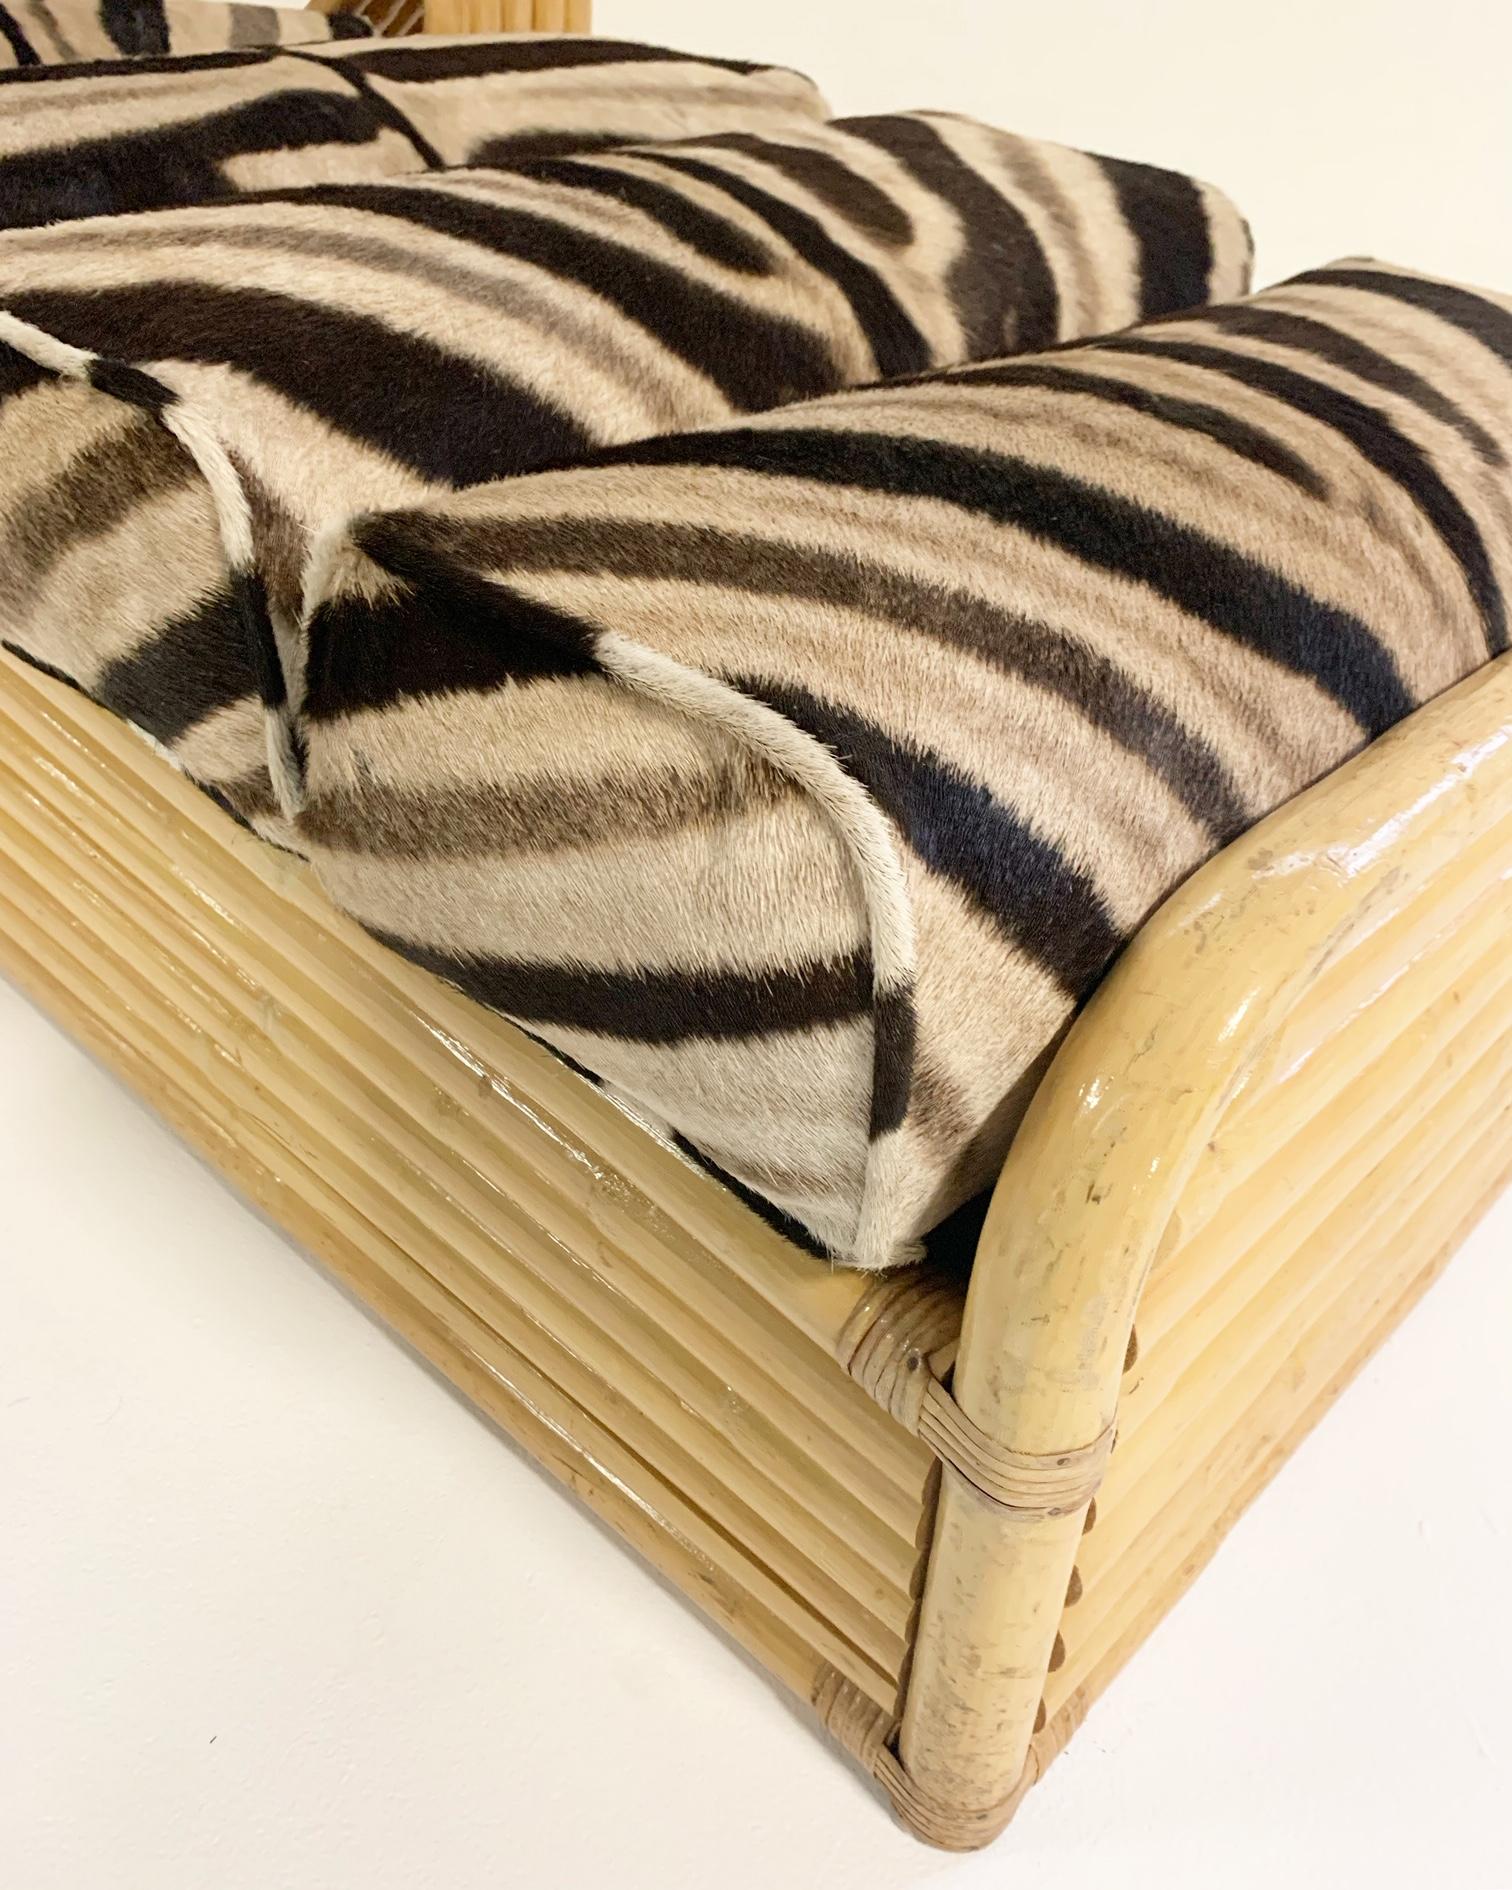 North American Vintage Rattan Lounge Chair and Ottoman in Zebra Hide